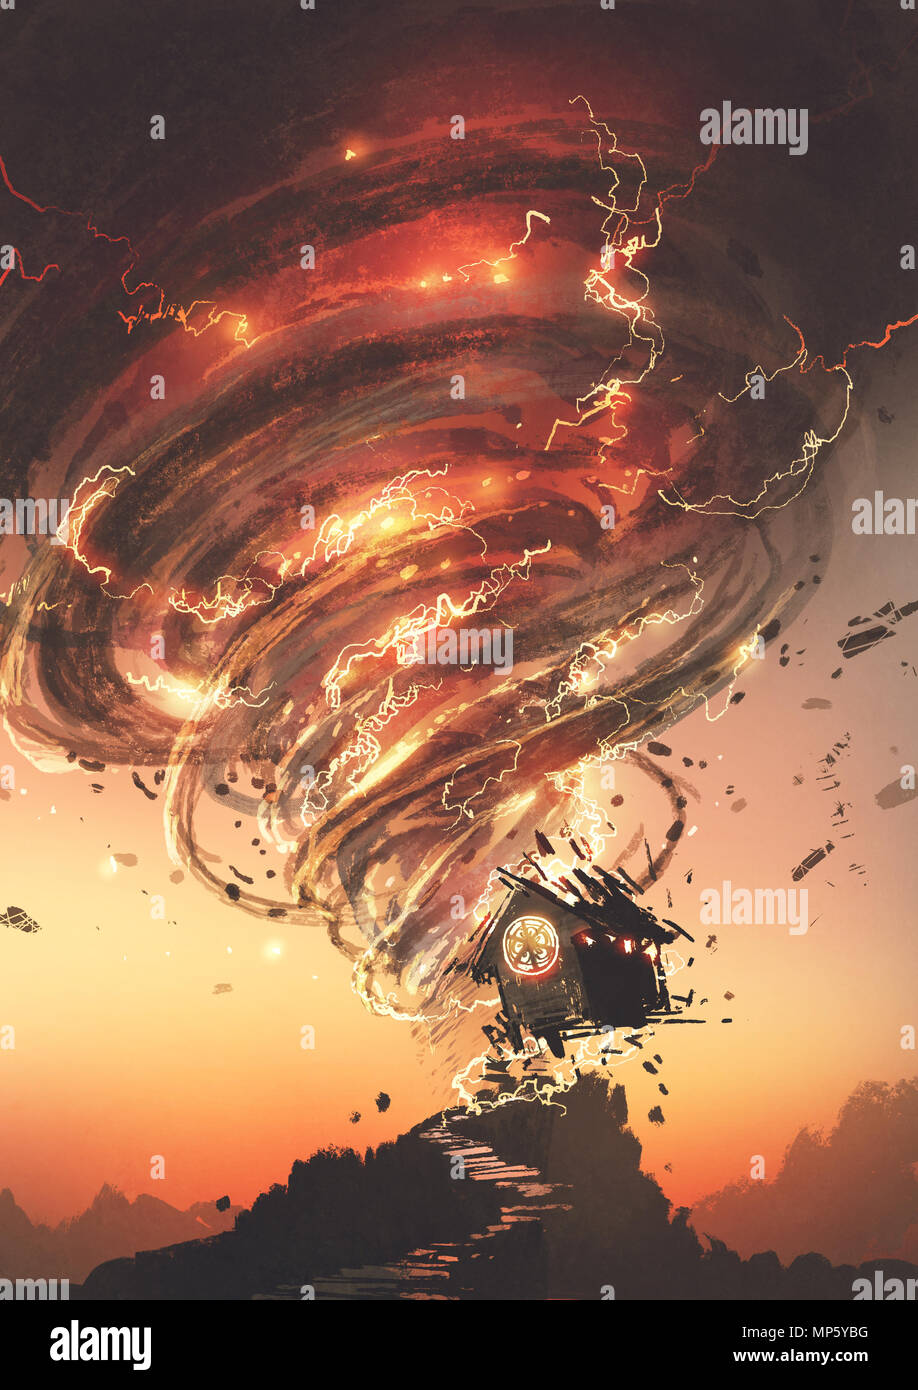 red tornado with lightning destroying the little old house, digital art style, illustration painting Stock Photo